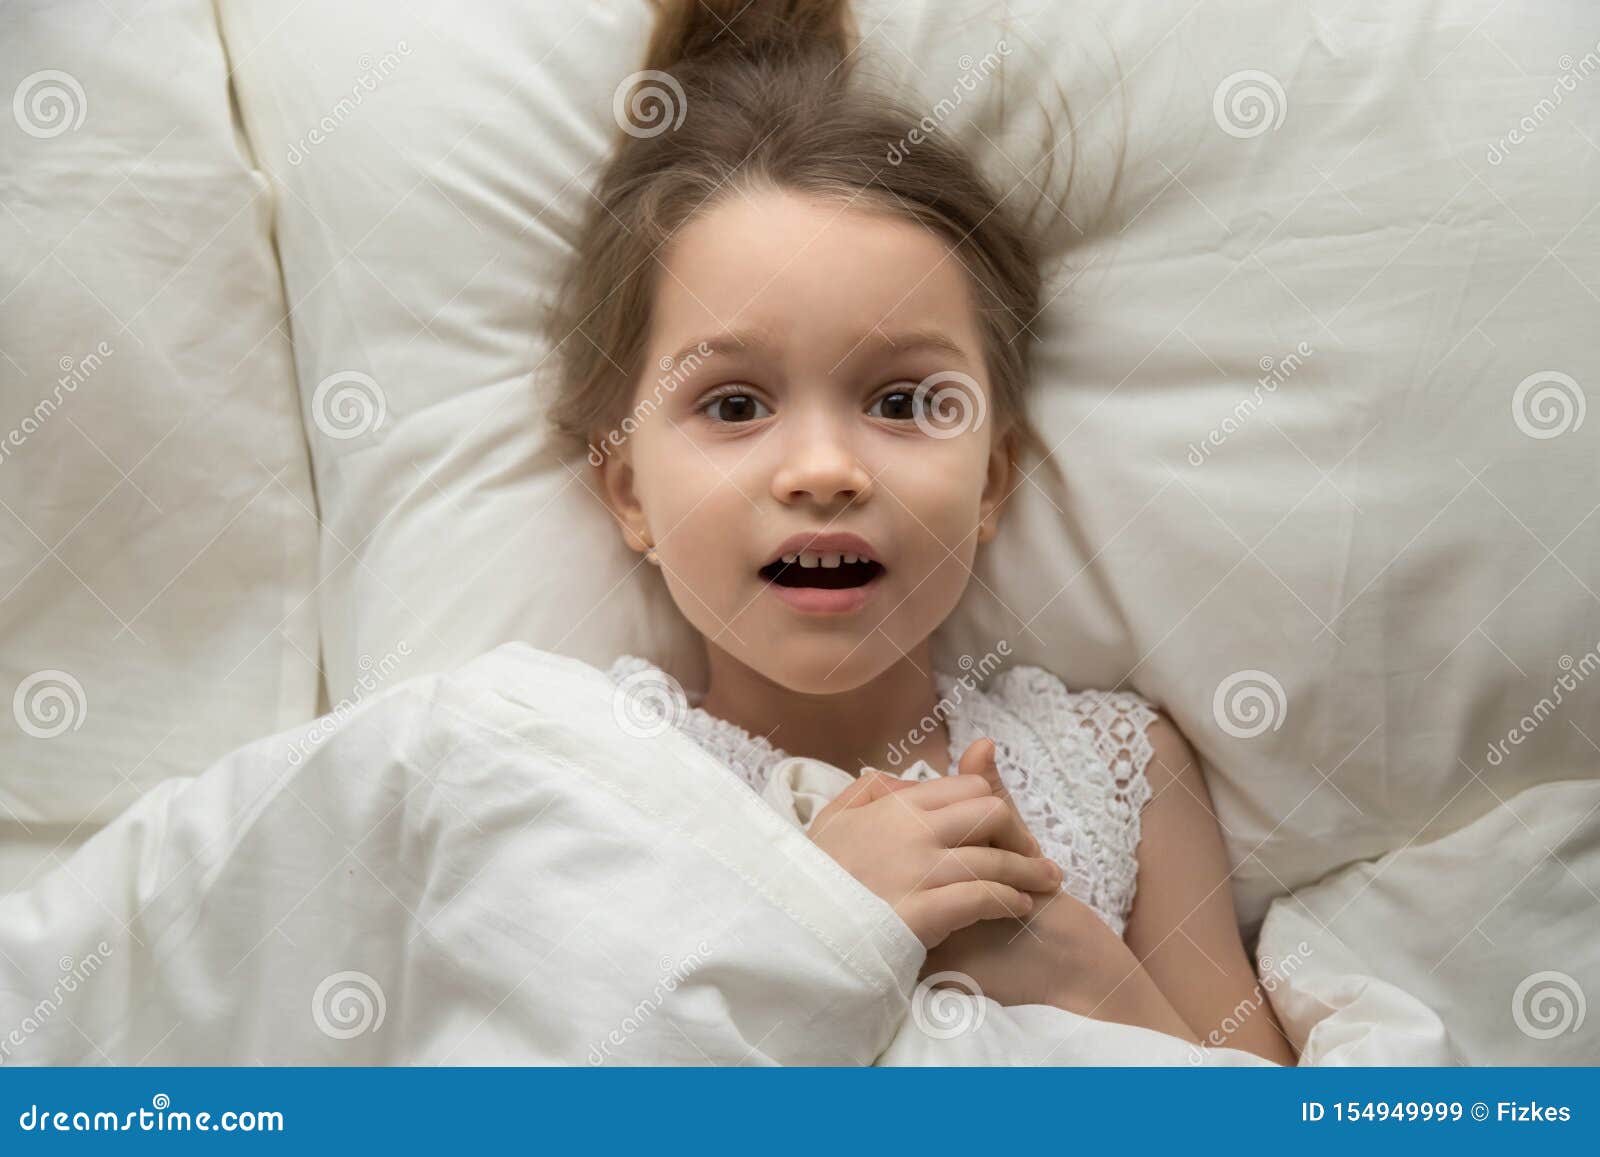 Above View Frightened Girl Lying On Bed Looking At Camera Stock Image